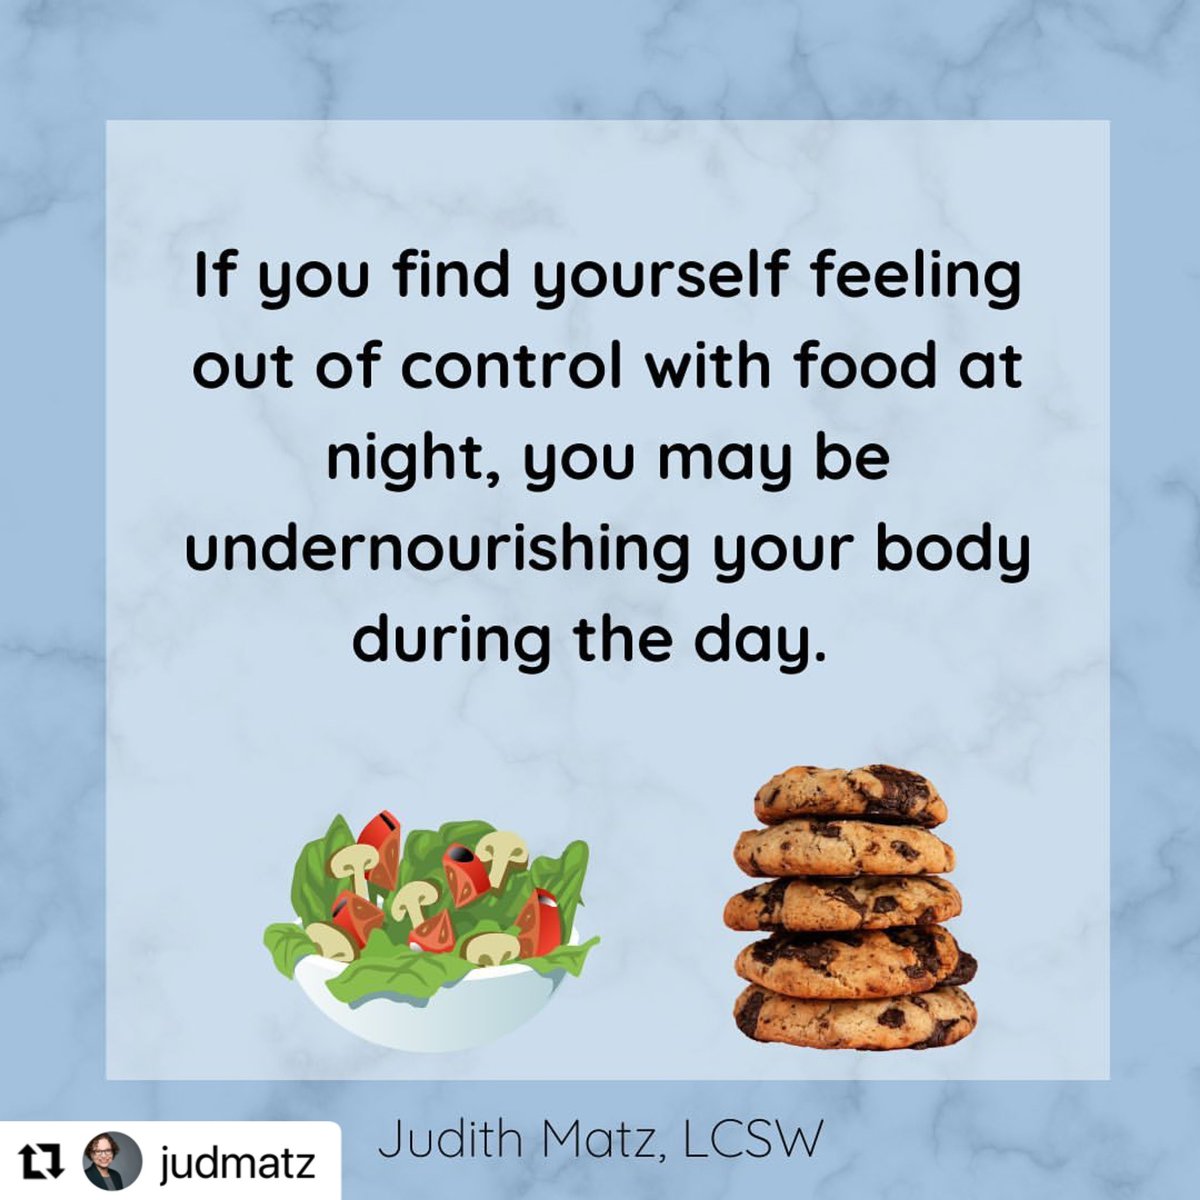 #Repost @judmatz with @use.repost
#makingpeacewithfood #makingpeacewithfoodcarddeck #bodypositivity #bodypositive #healthateverysize #haes #weightstigma #intuitiveeating #antidiet #dietmentality #allfoodsfit #antidietculture #dietsdontwork #eatingdisorderrecovery #selfcompassion